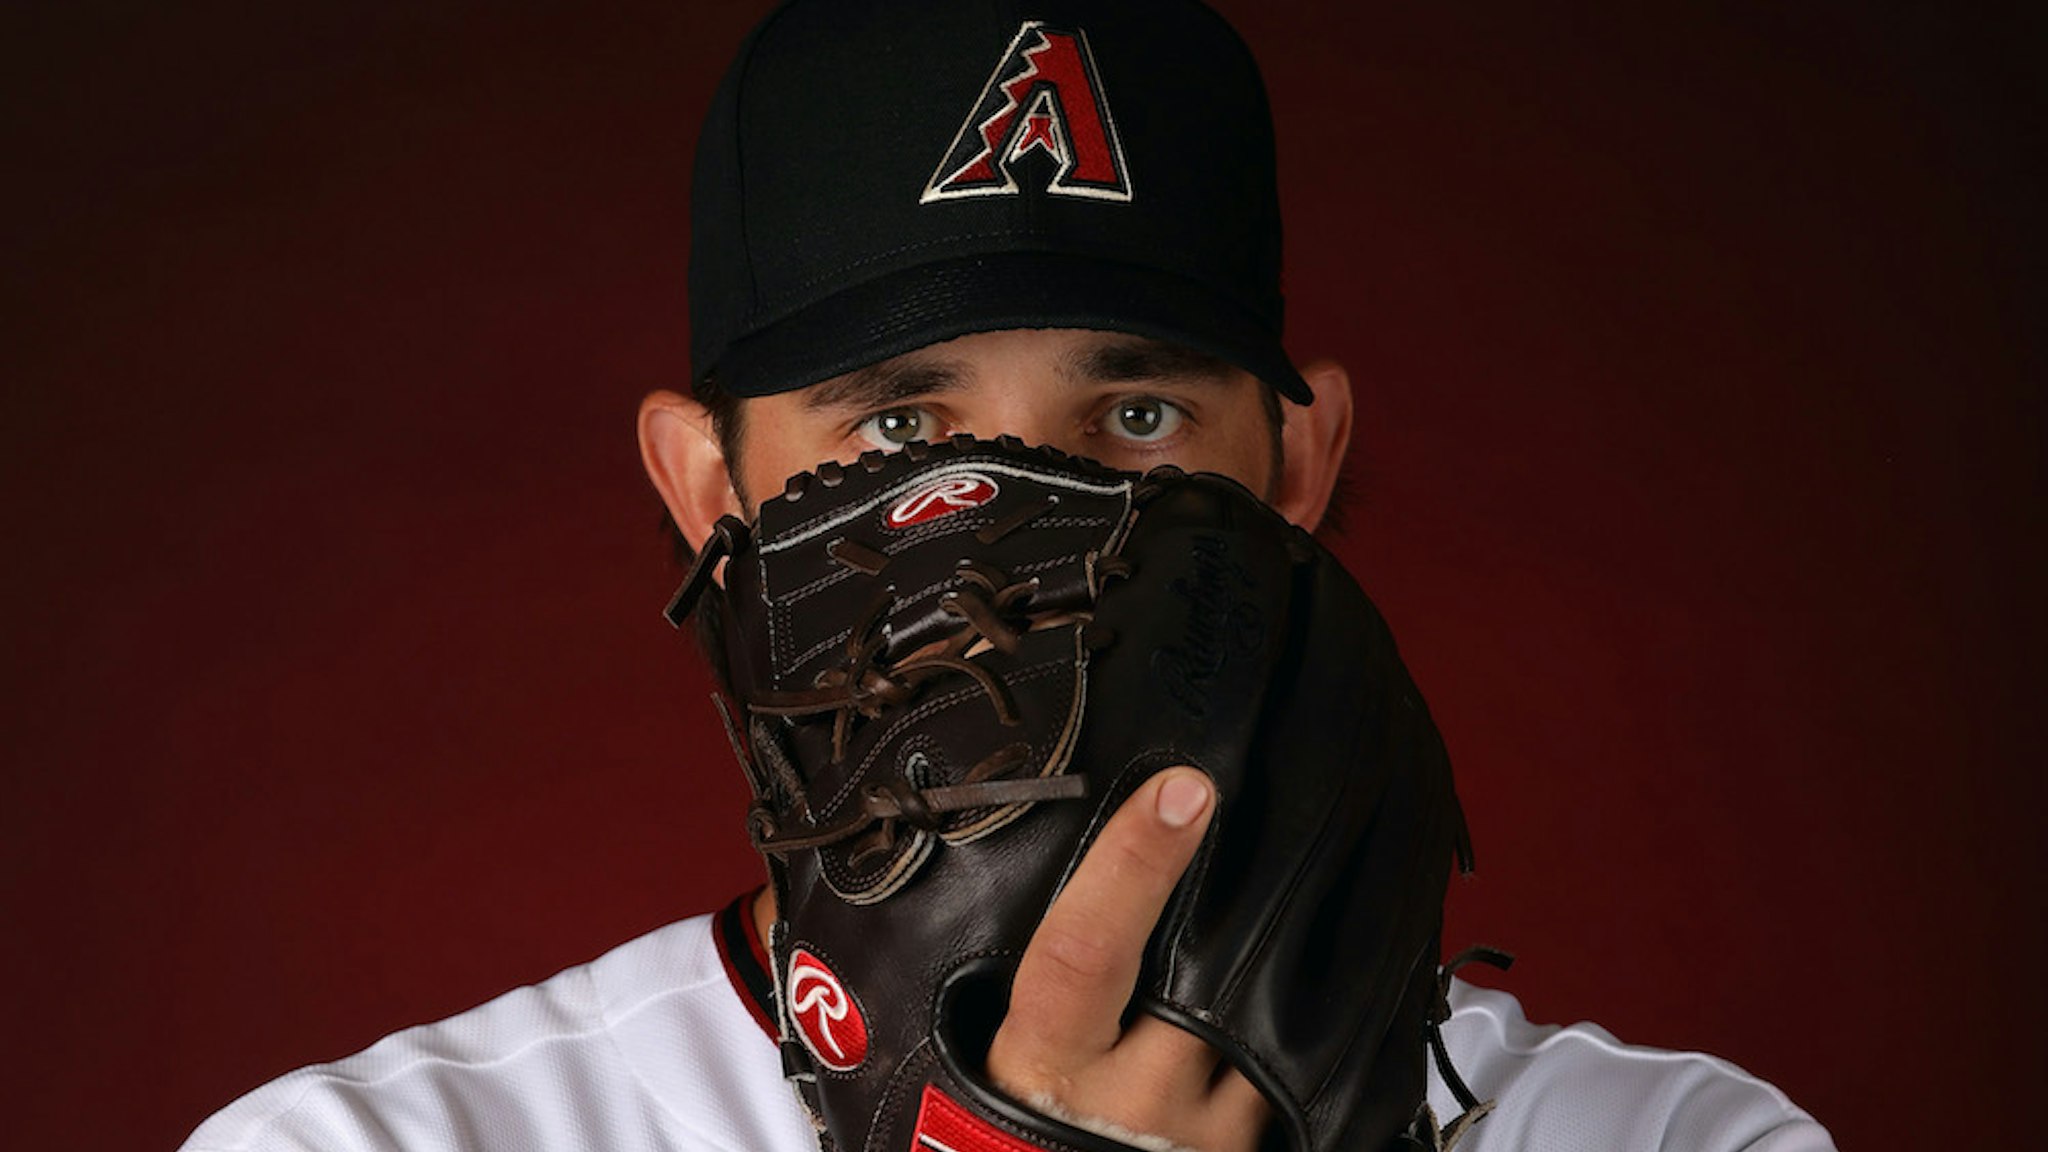 Pitcher Madison Bumgarner #40 of the Arizona Diamondbacks poses for a portrait during MLB media day at Salt River Fields at Talking Stick on February 21, 2020 in Scottsdale, Arizona. (Photo by Christian Petersen/Getty Images)